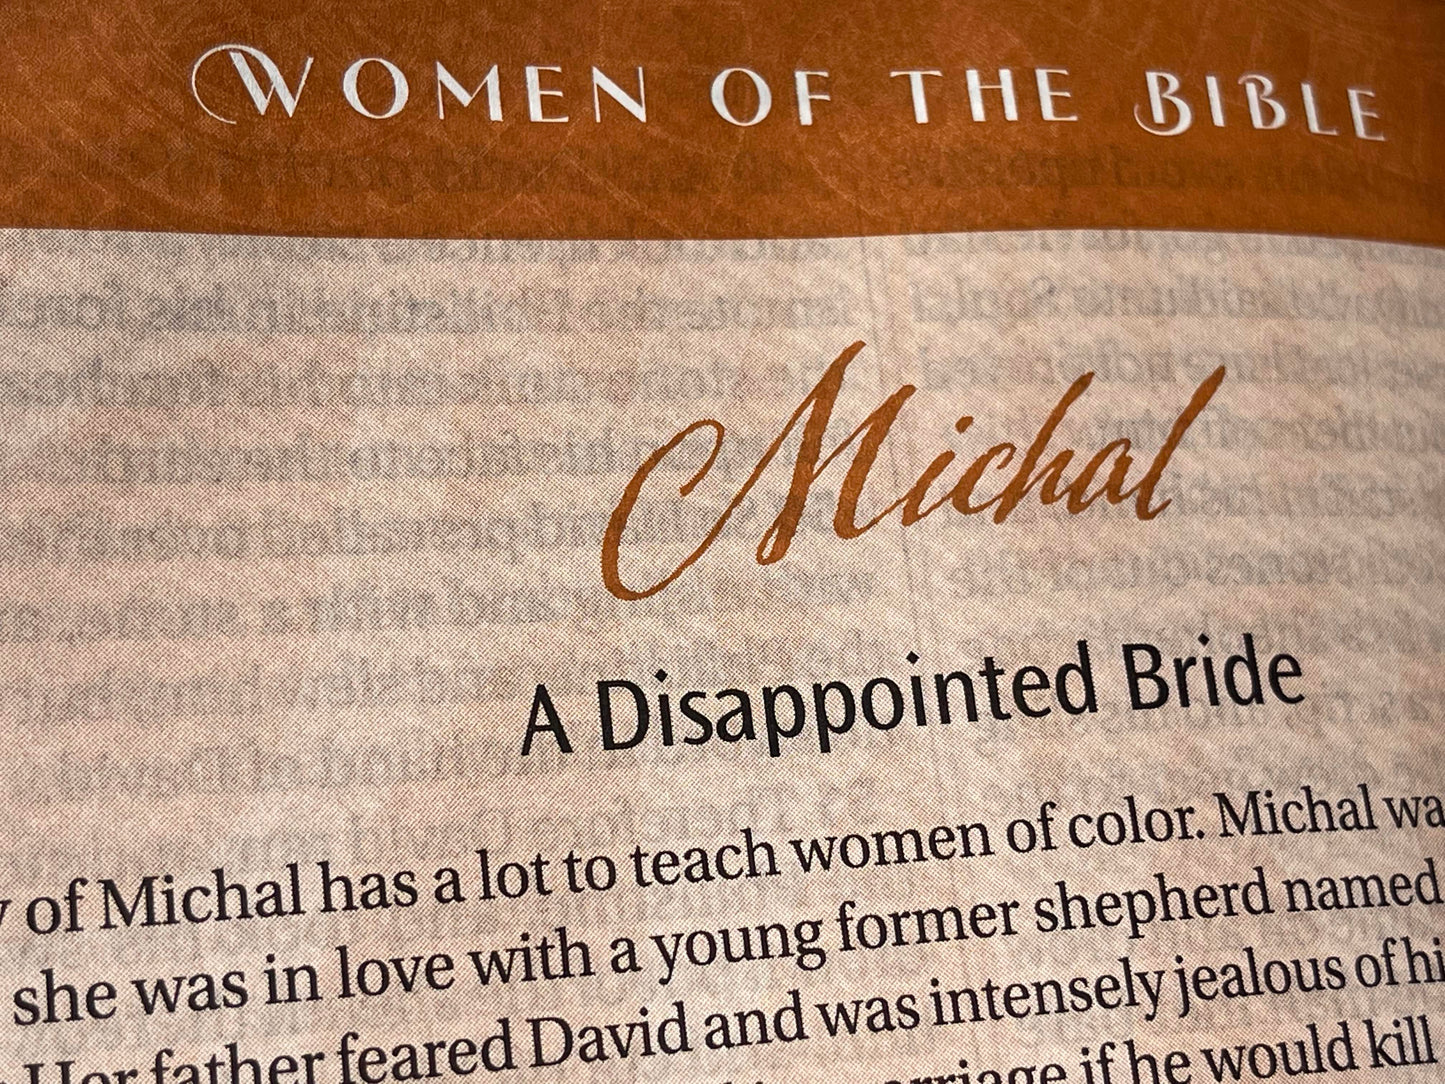 The New Women of Color Study Bible - Purple Luxleather Edition